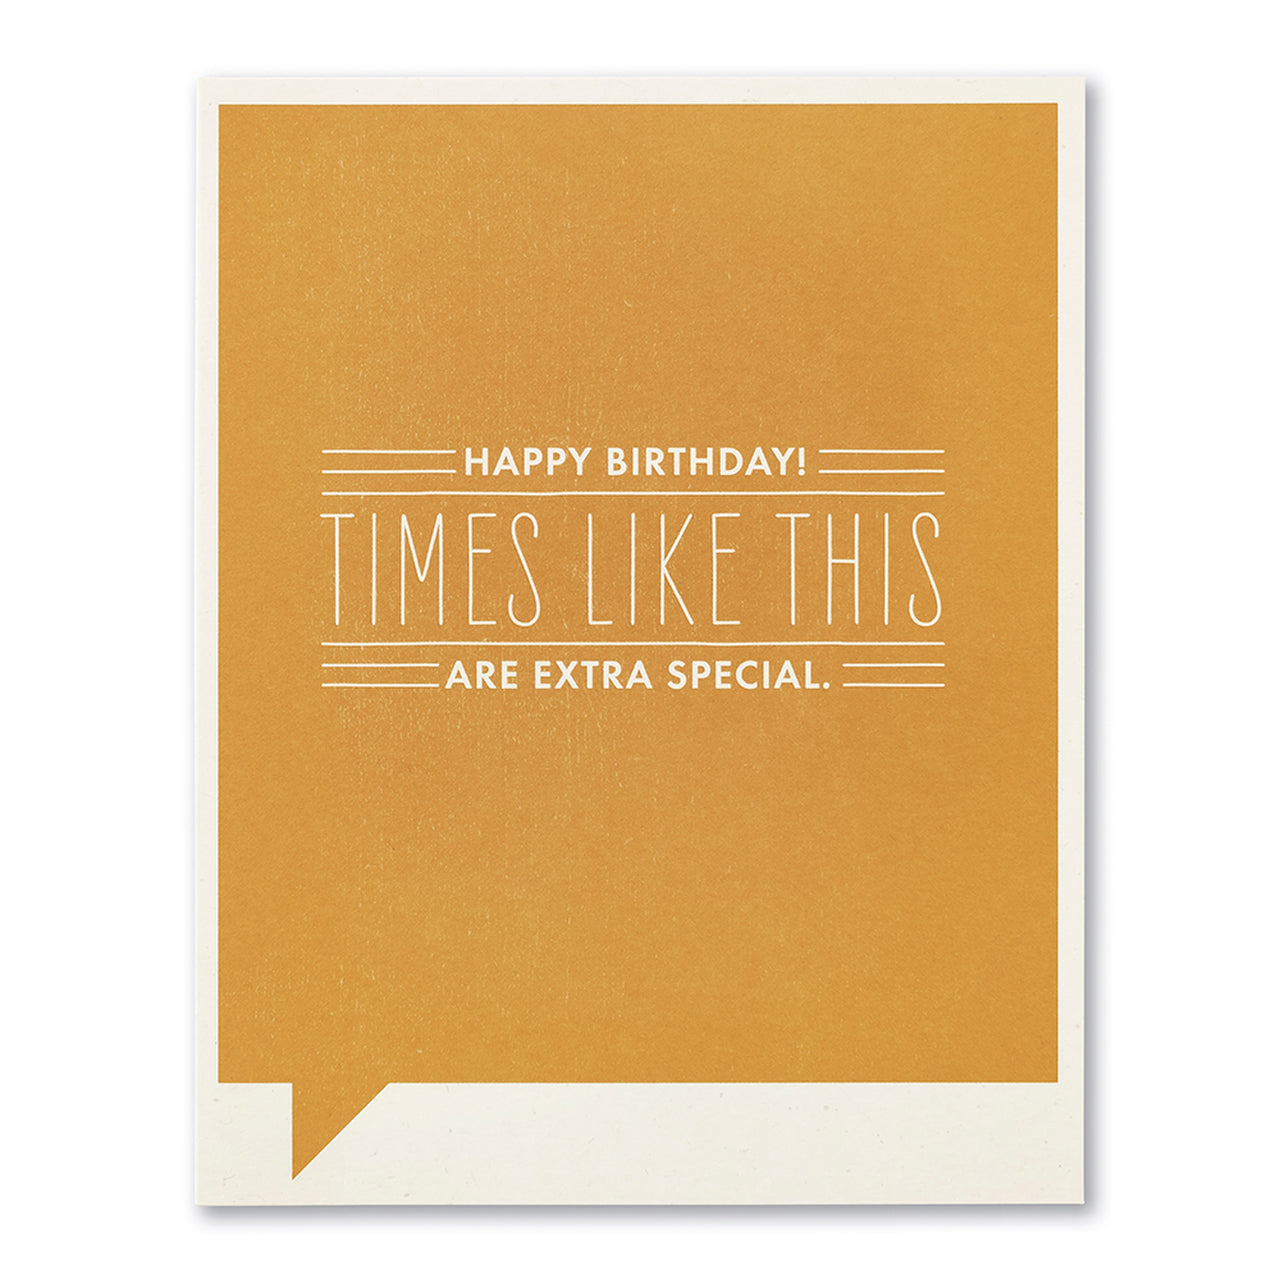 Frank and Funny Greeting Card - Birthday - Happy Birthday! Times Like These Are Extra Special - Mellow Monkey